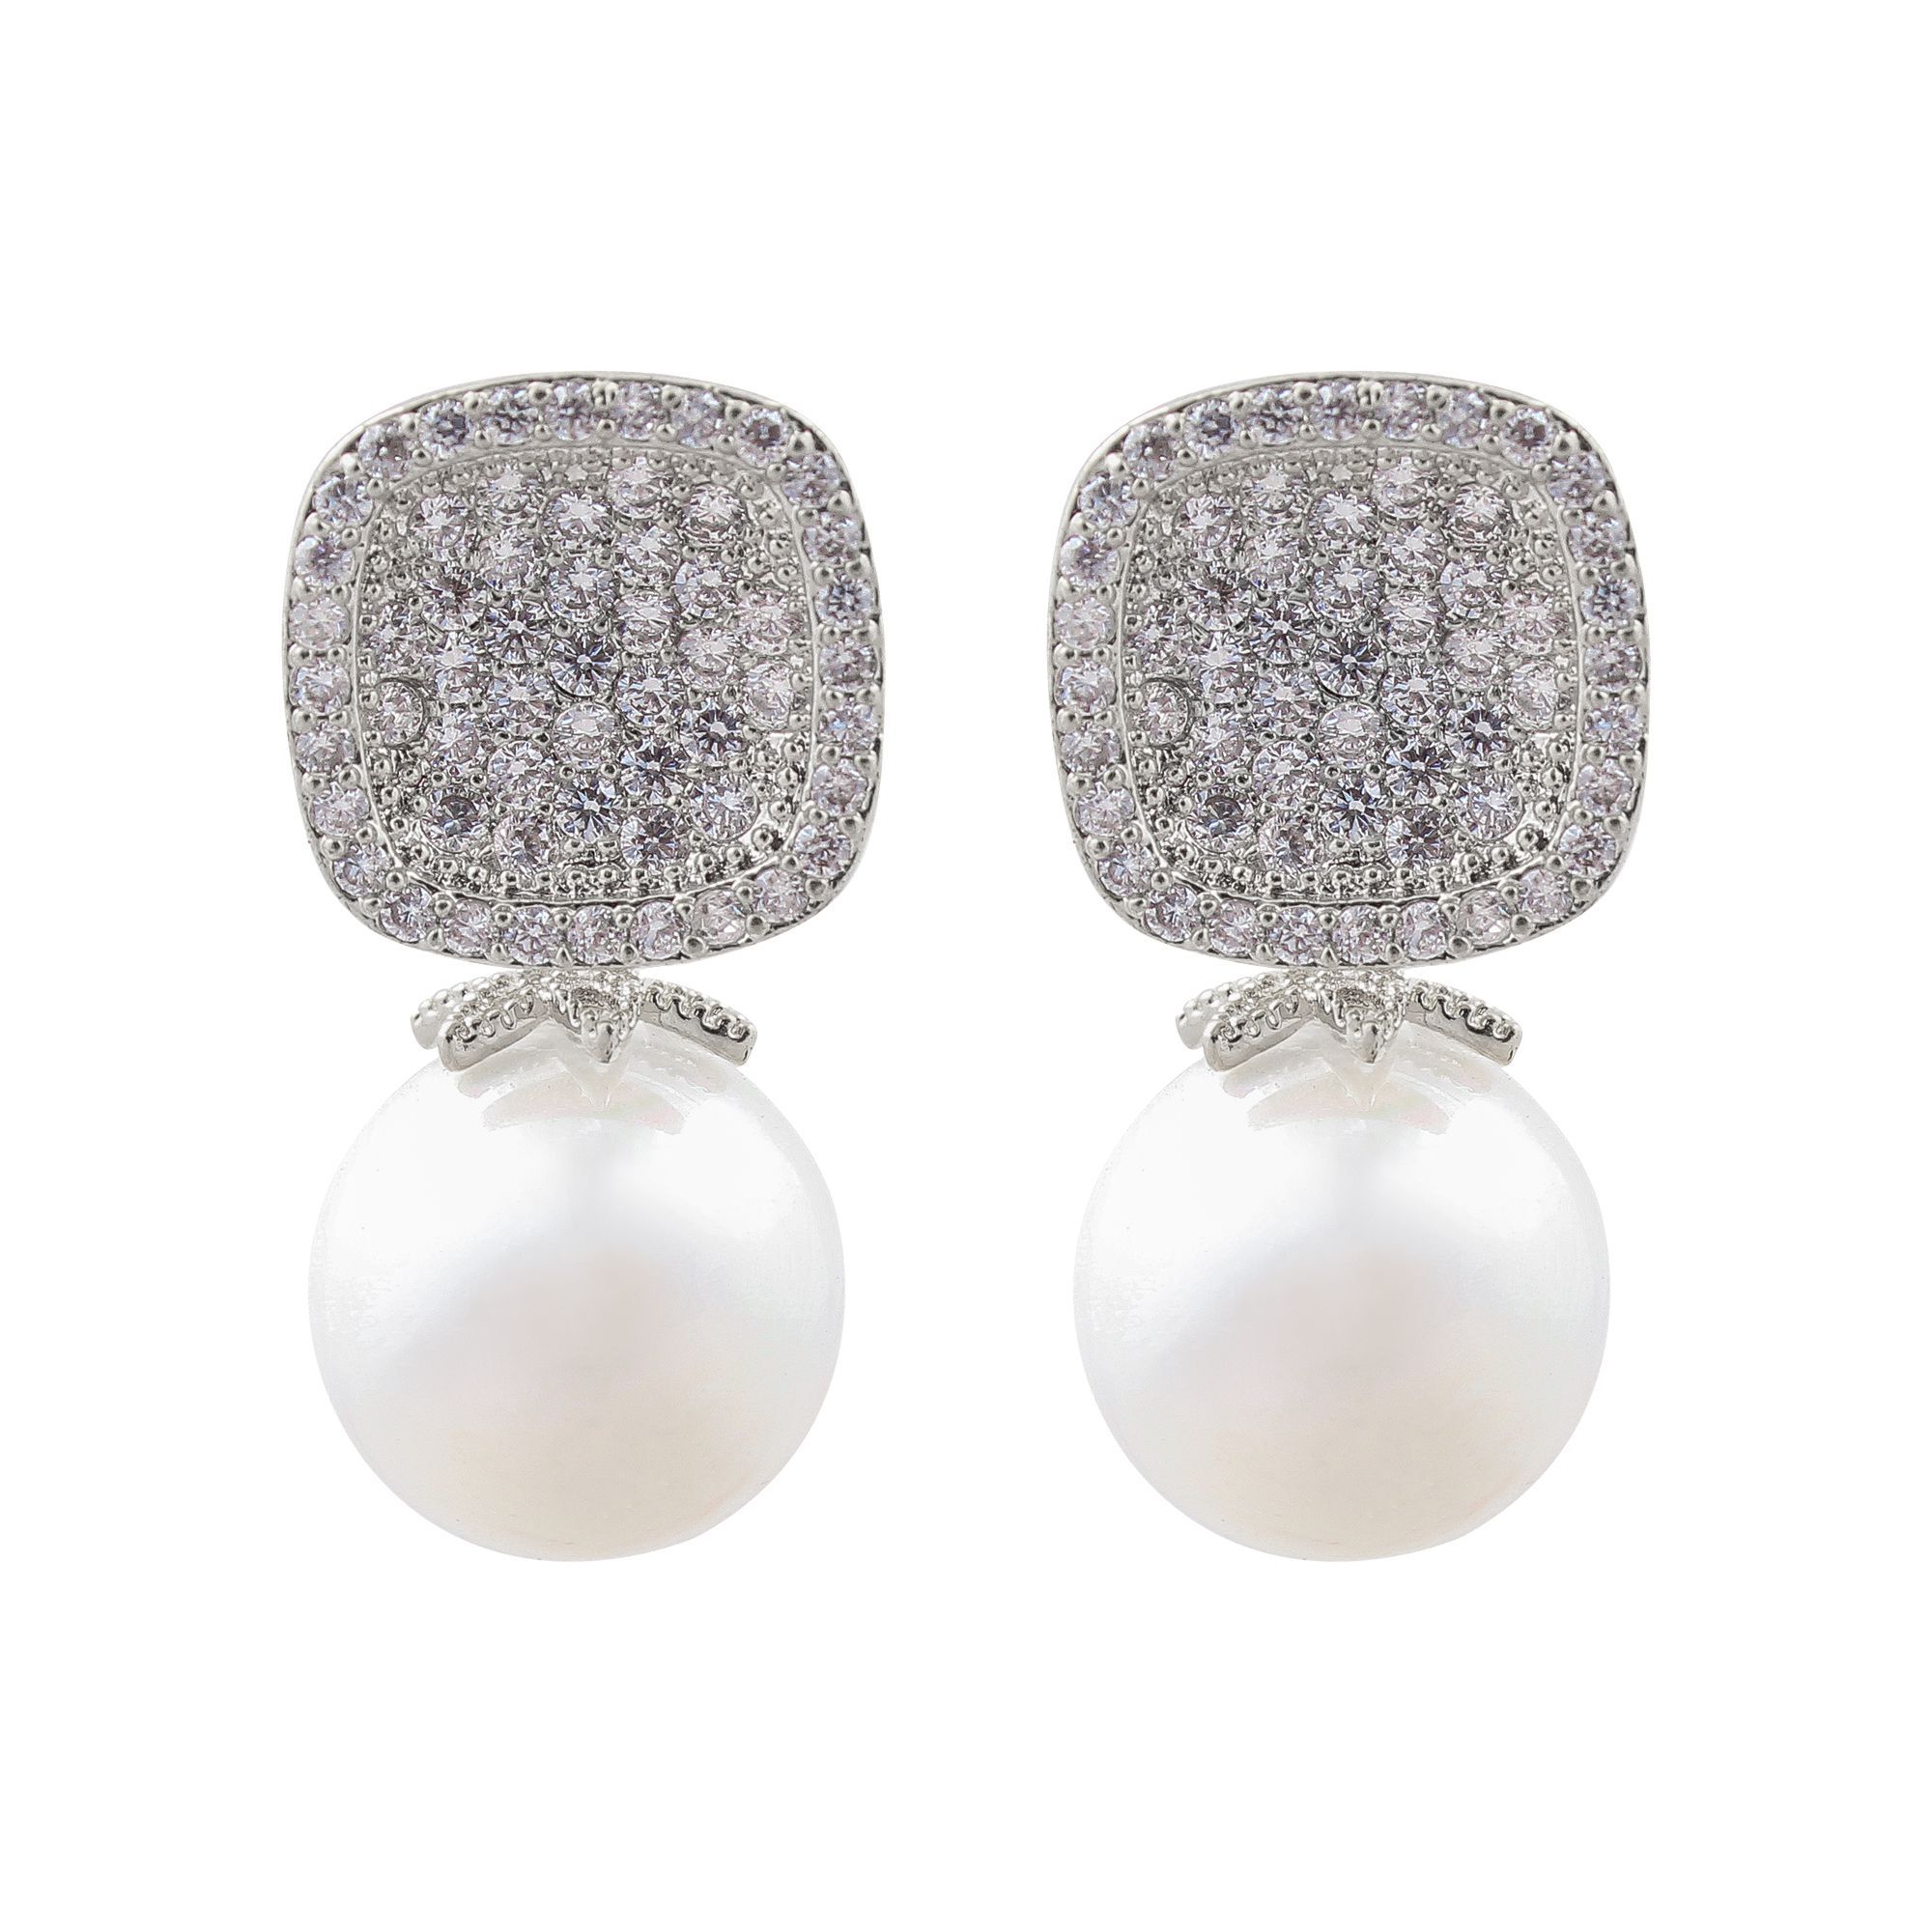 Purchase Pearl Girls Earrings, Silver, NS-081 Online at Best Price in ...